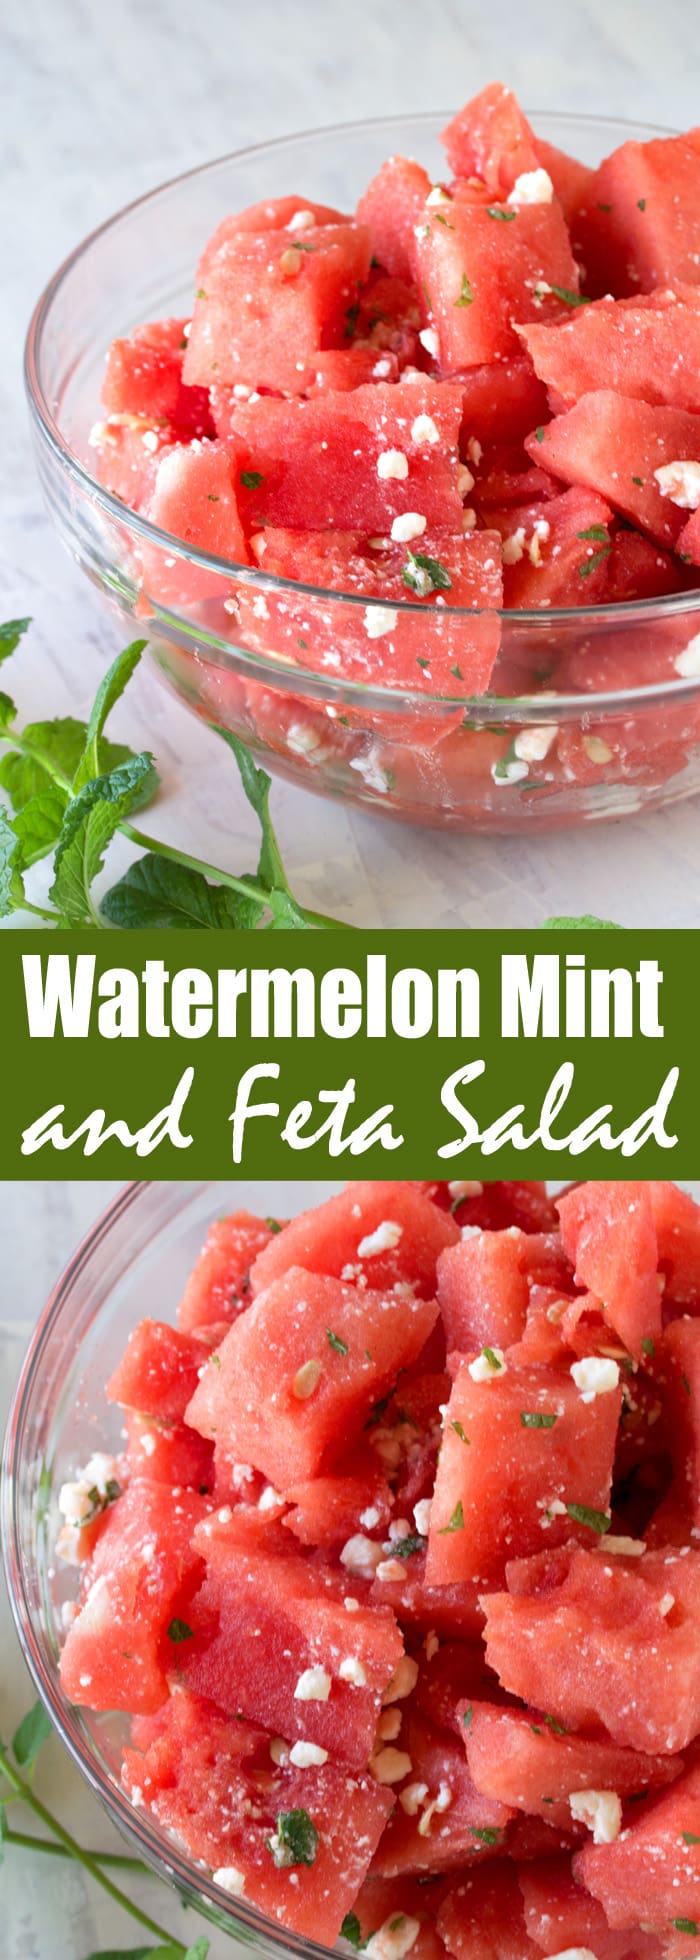 Serve simple summer watermelon up gourmet style with this Watermelon Feta Salad with Mint and Lemon. It's incredibly easy, and oh so tasty!